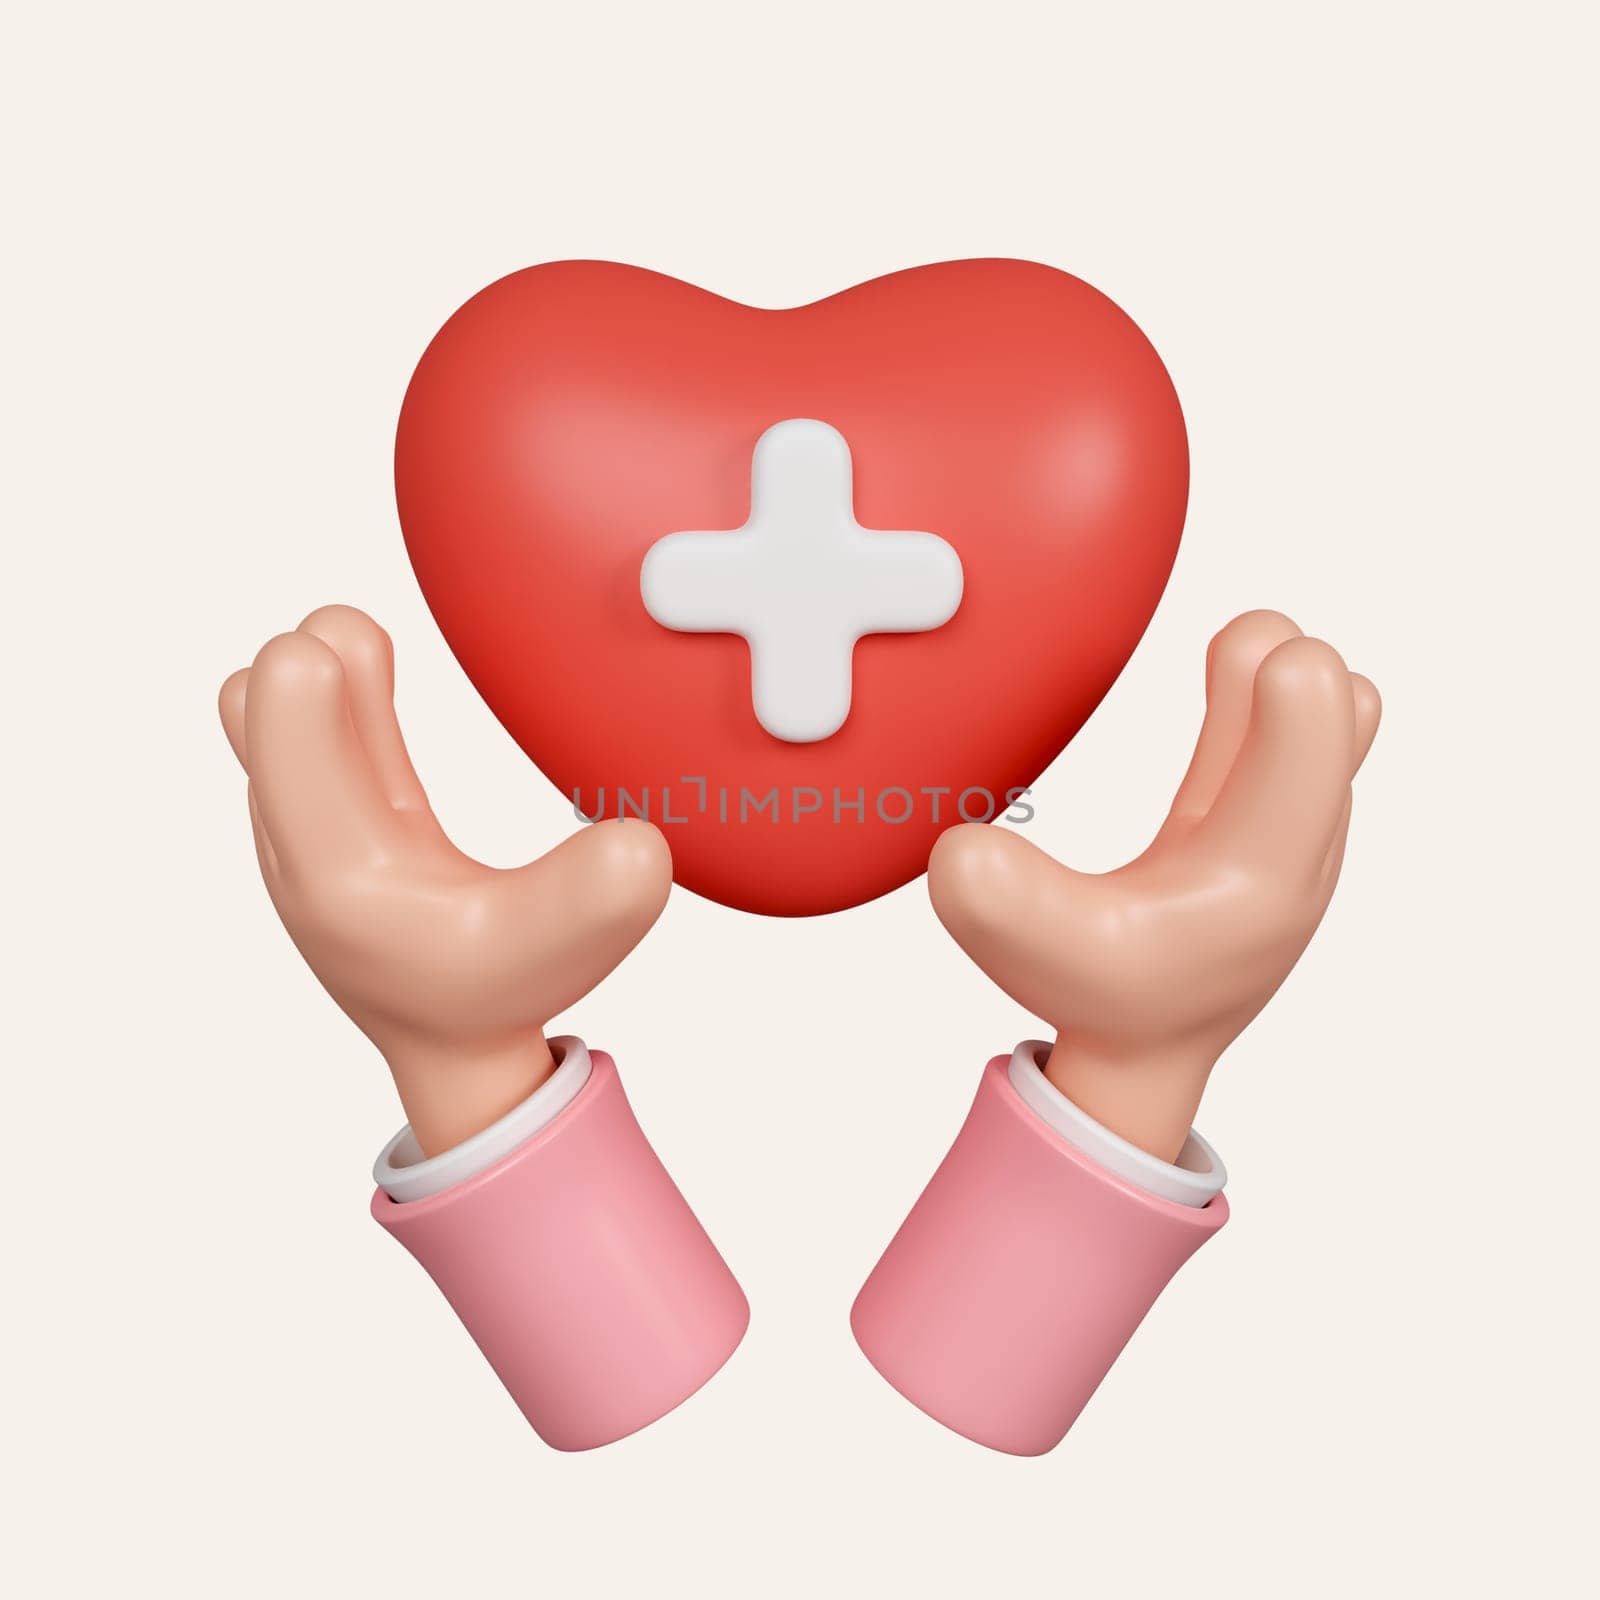 3d hand hold heart with plus sign. heartbeat or cardiogram for healthy lifestyle, pulse beat measure, cardiac assistance. icon isolated on white background. 3d rendering illustration. Clipping path..